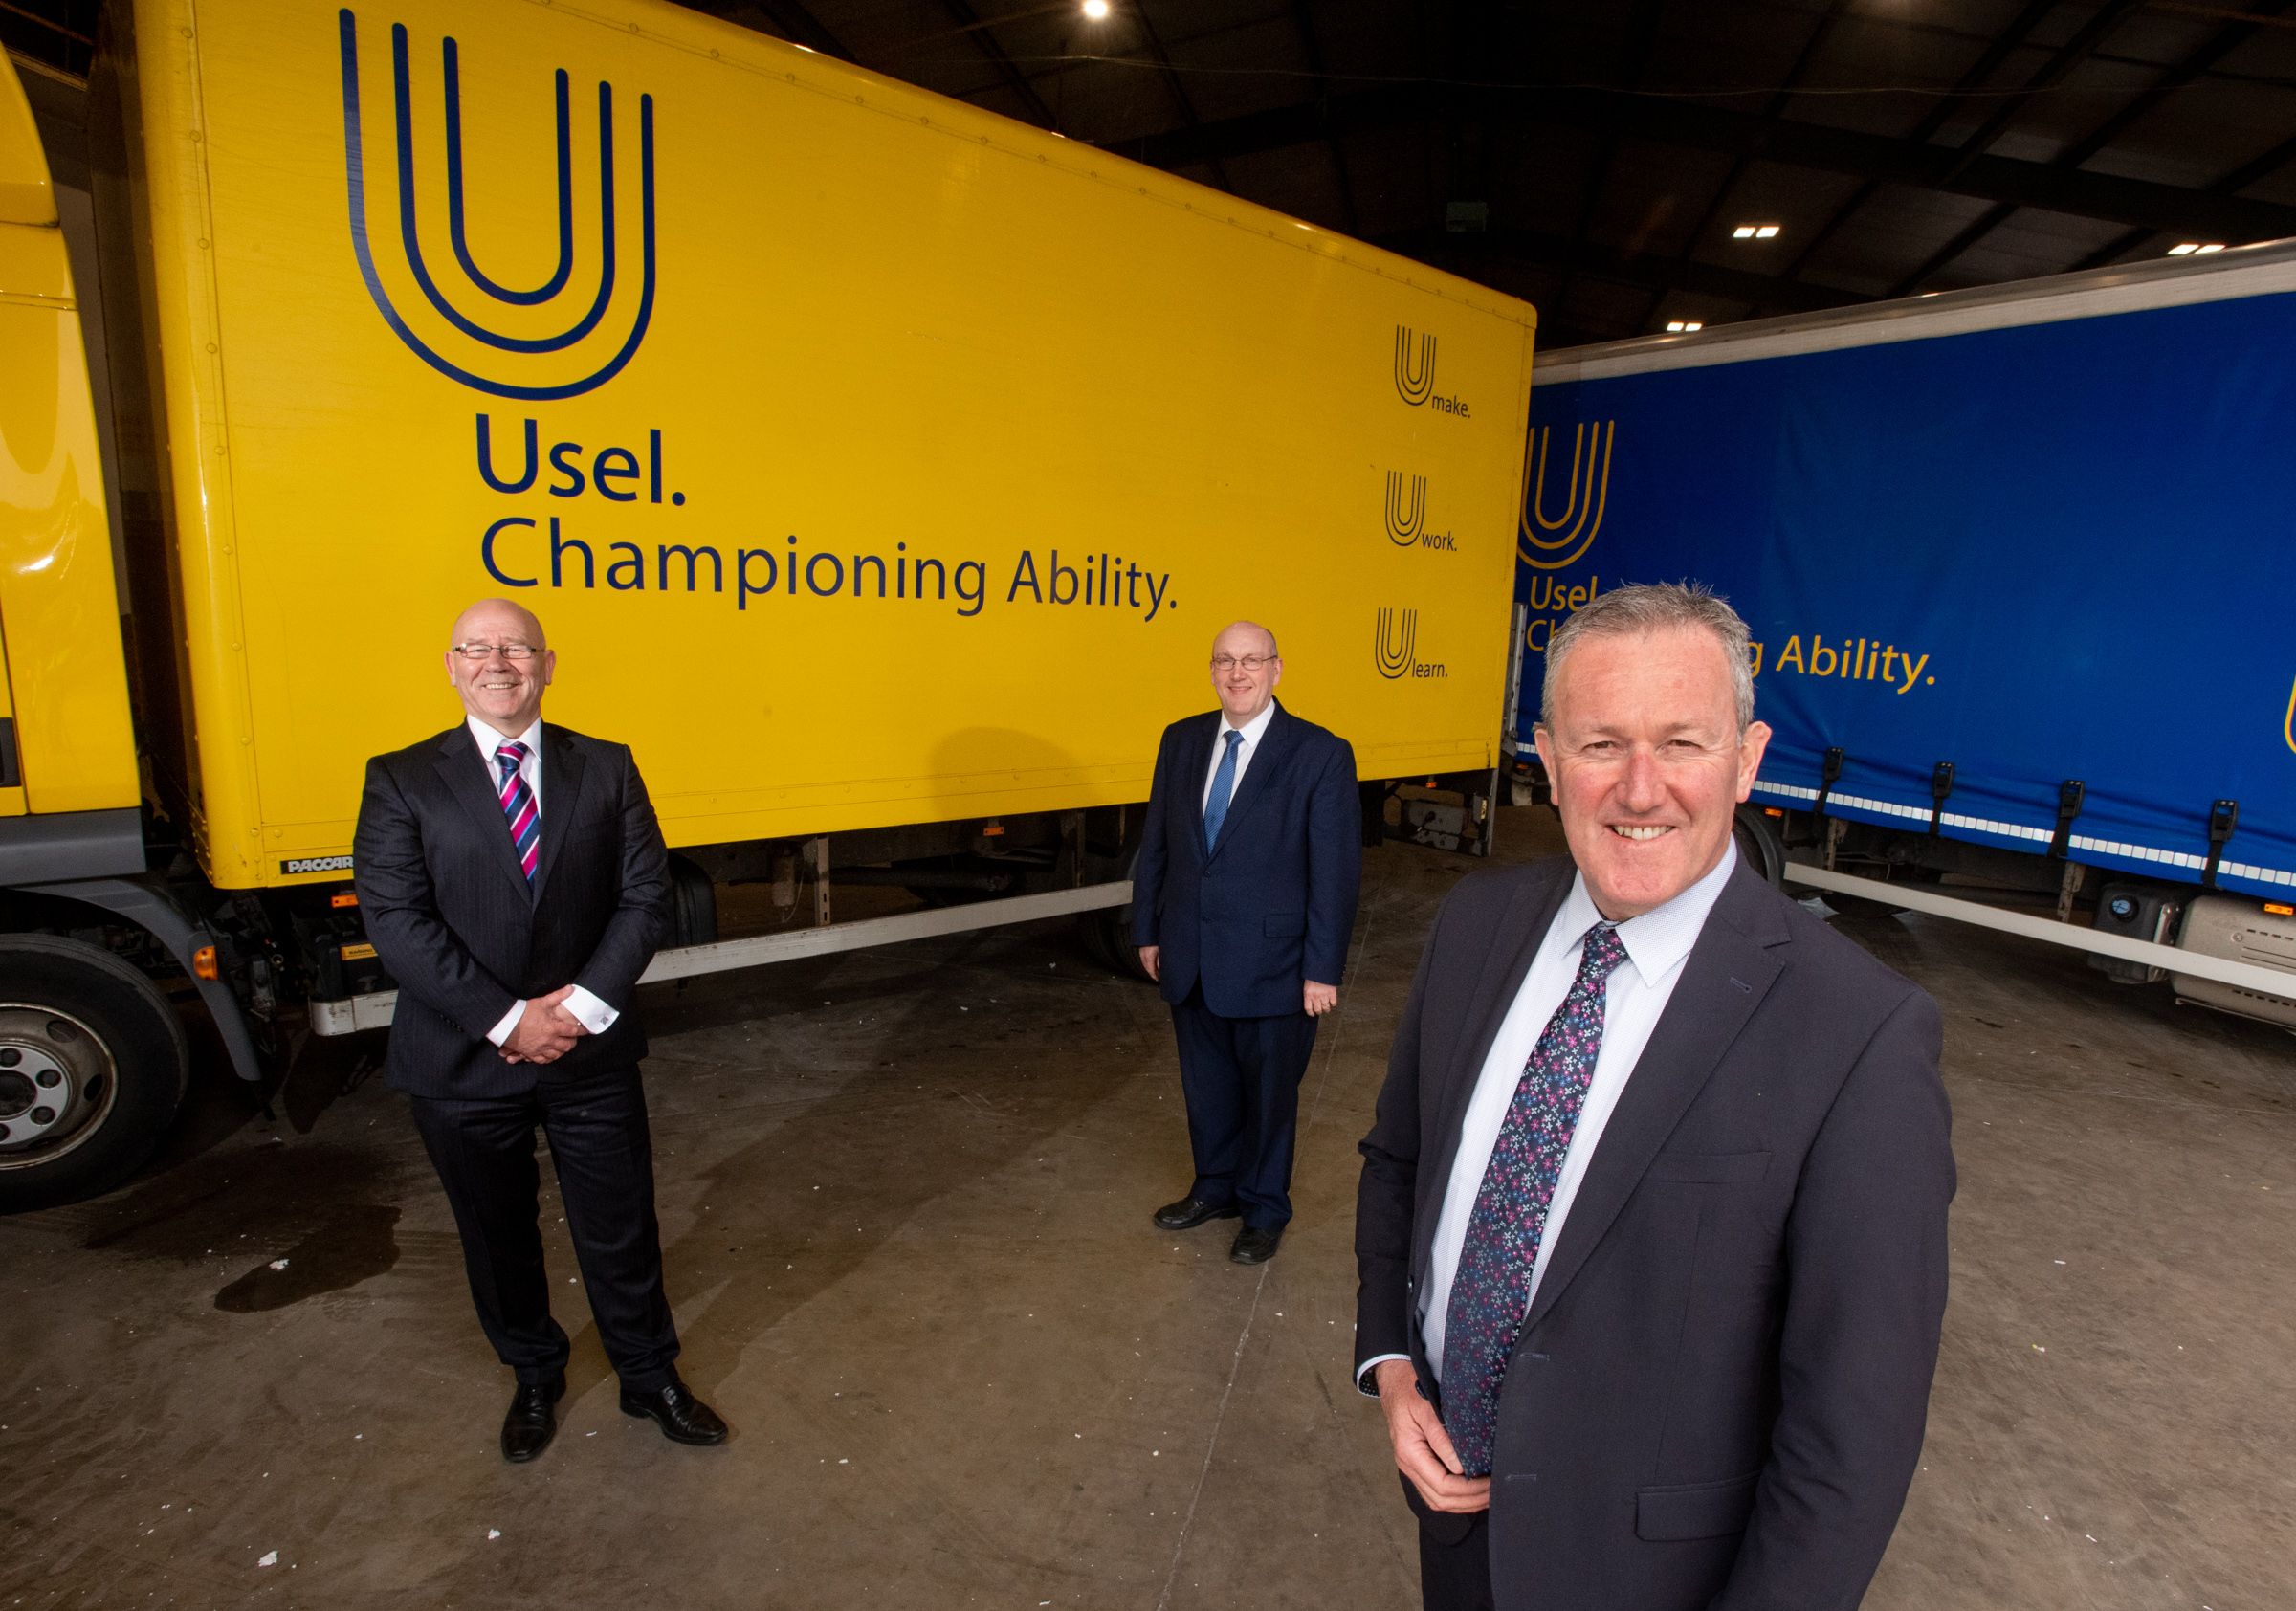 CHAMPIONING ABILITY: Finance Minister Conor Murphy with Usel Chief Executive Bill Atkinson, and Chair William Leathem.